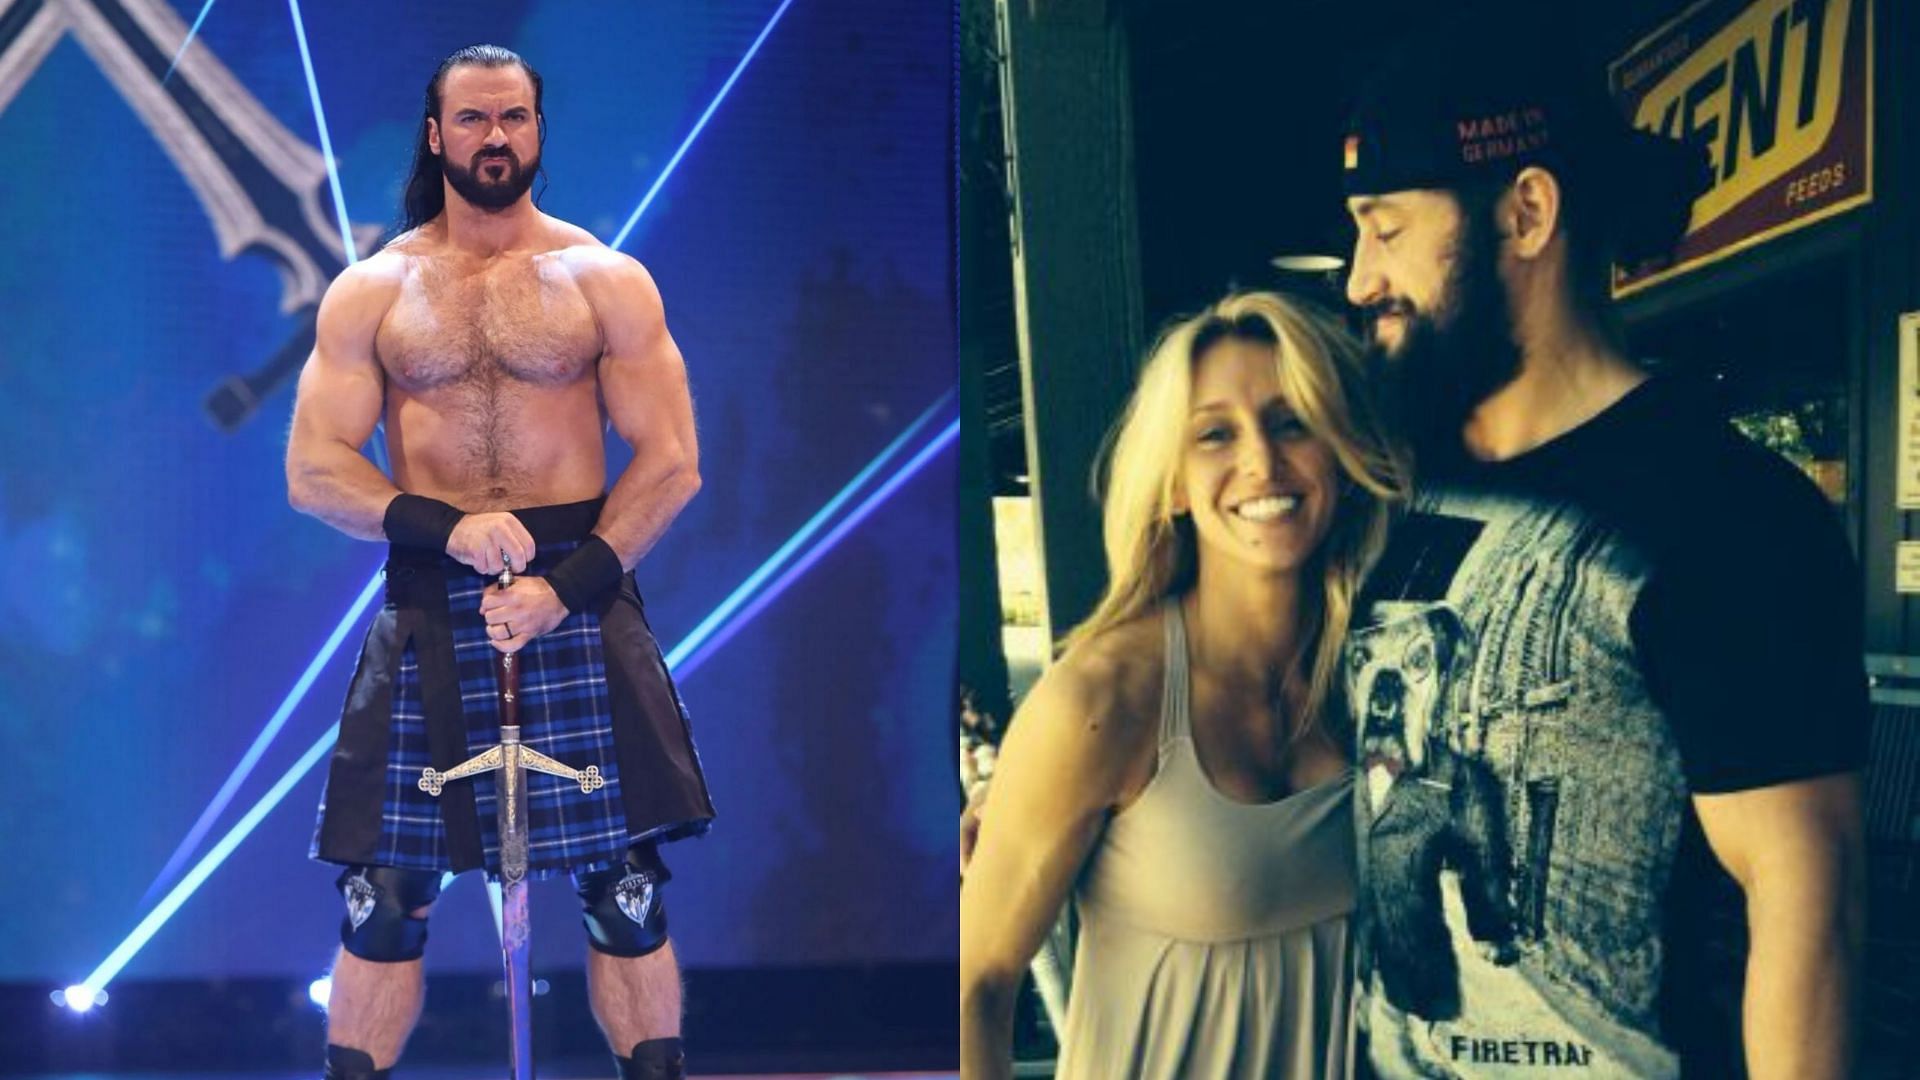 4 current WWE Superstars who have had relatively short marriages